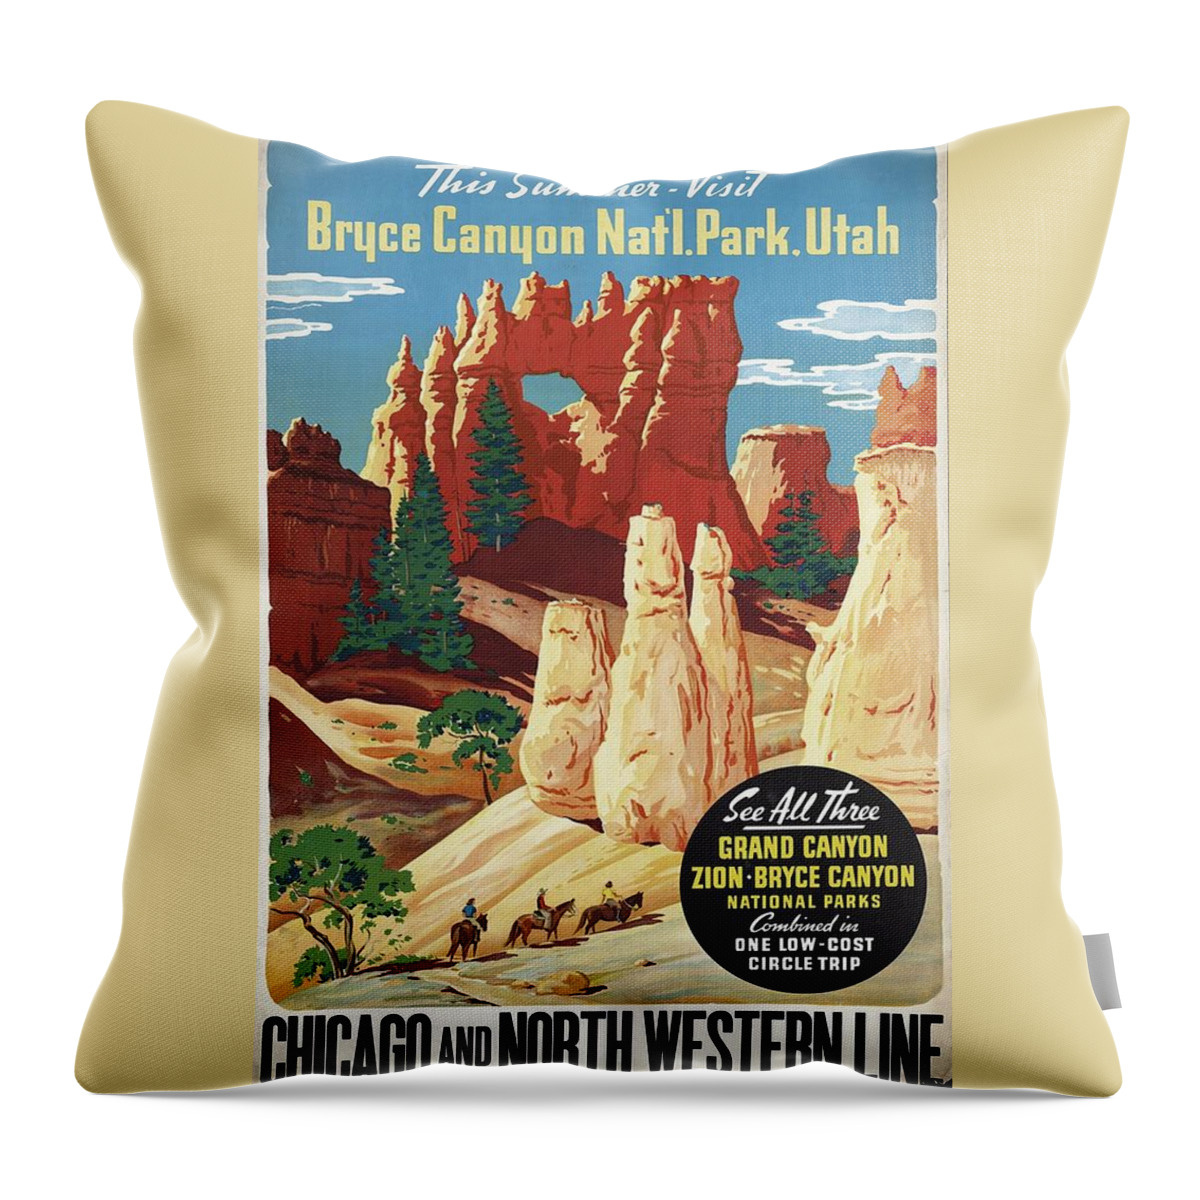 Bryce Canyon Throw Pillow featuring the mixed media This Summer - Visit Bryce Canyon National Par, Utah, USA - Retro travel Poster - Vintage Poster by Studio Grafiikka